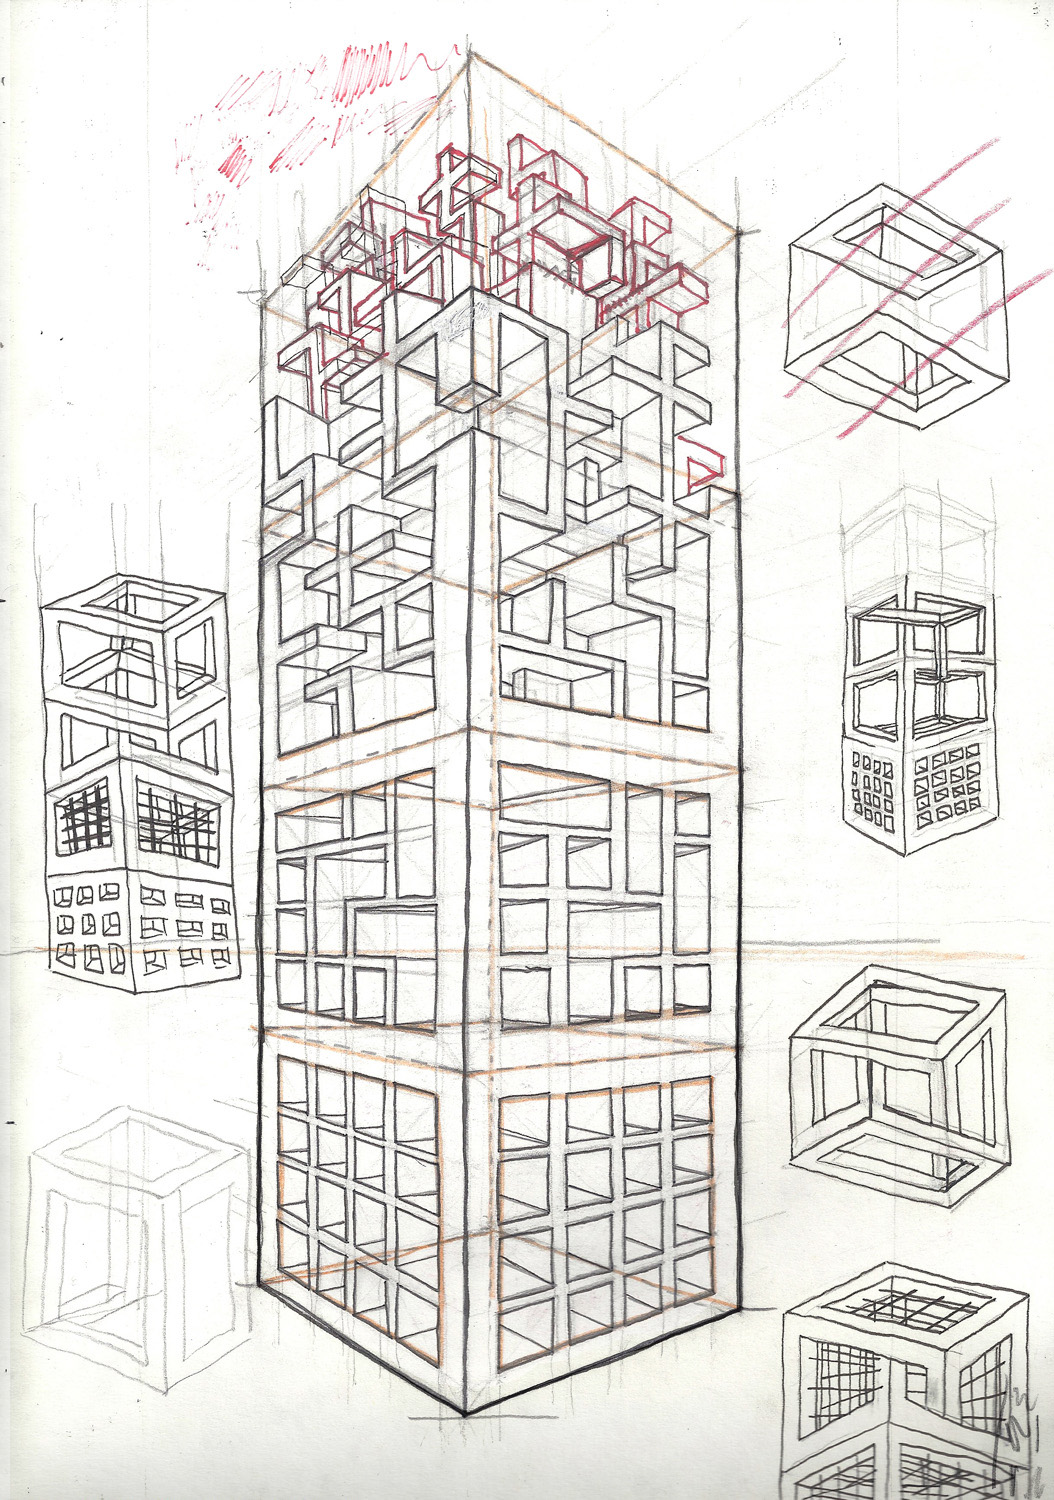 housing estate tower block geometry of living printmaking impossible figure illusion Impossible object rubik's cube cage labirynth sketch etching council estate cranbrook estate